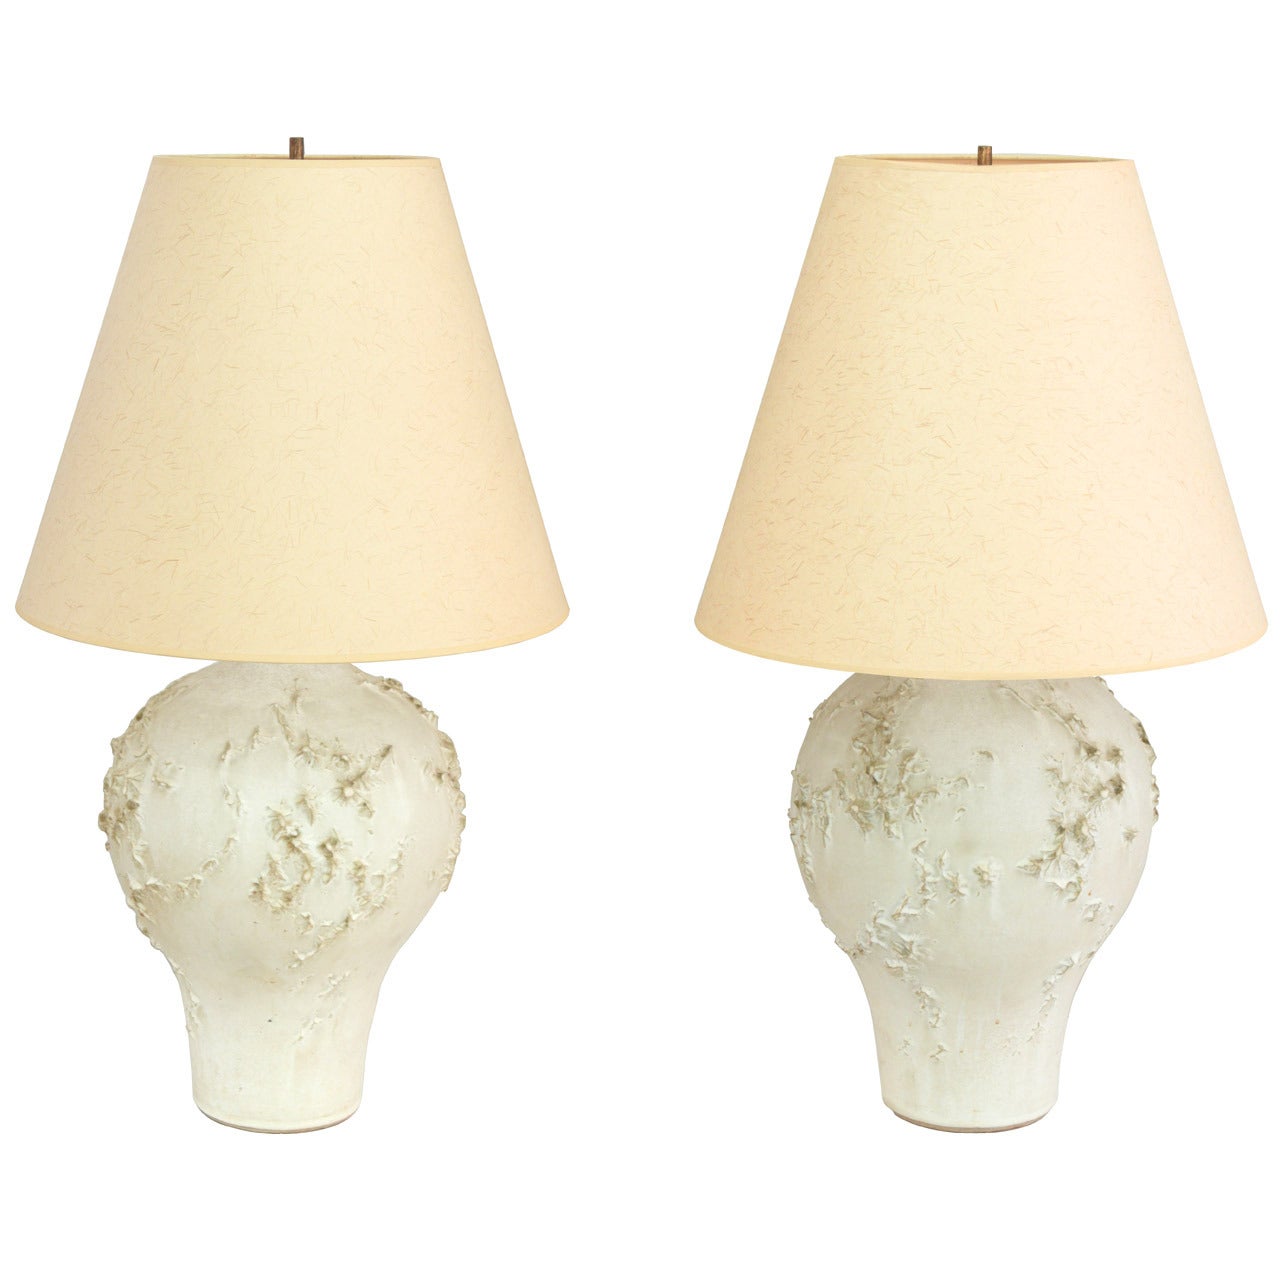 Pair of Hand-Thrown Ceramic Table Lamps by Design Technics